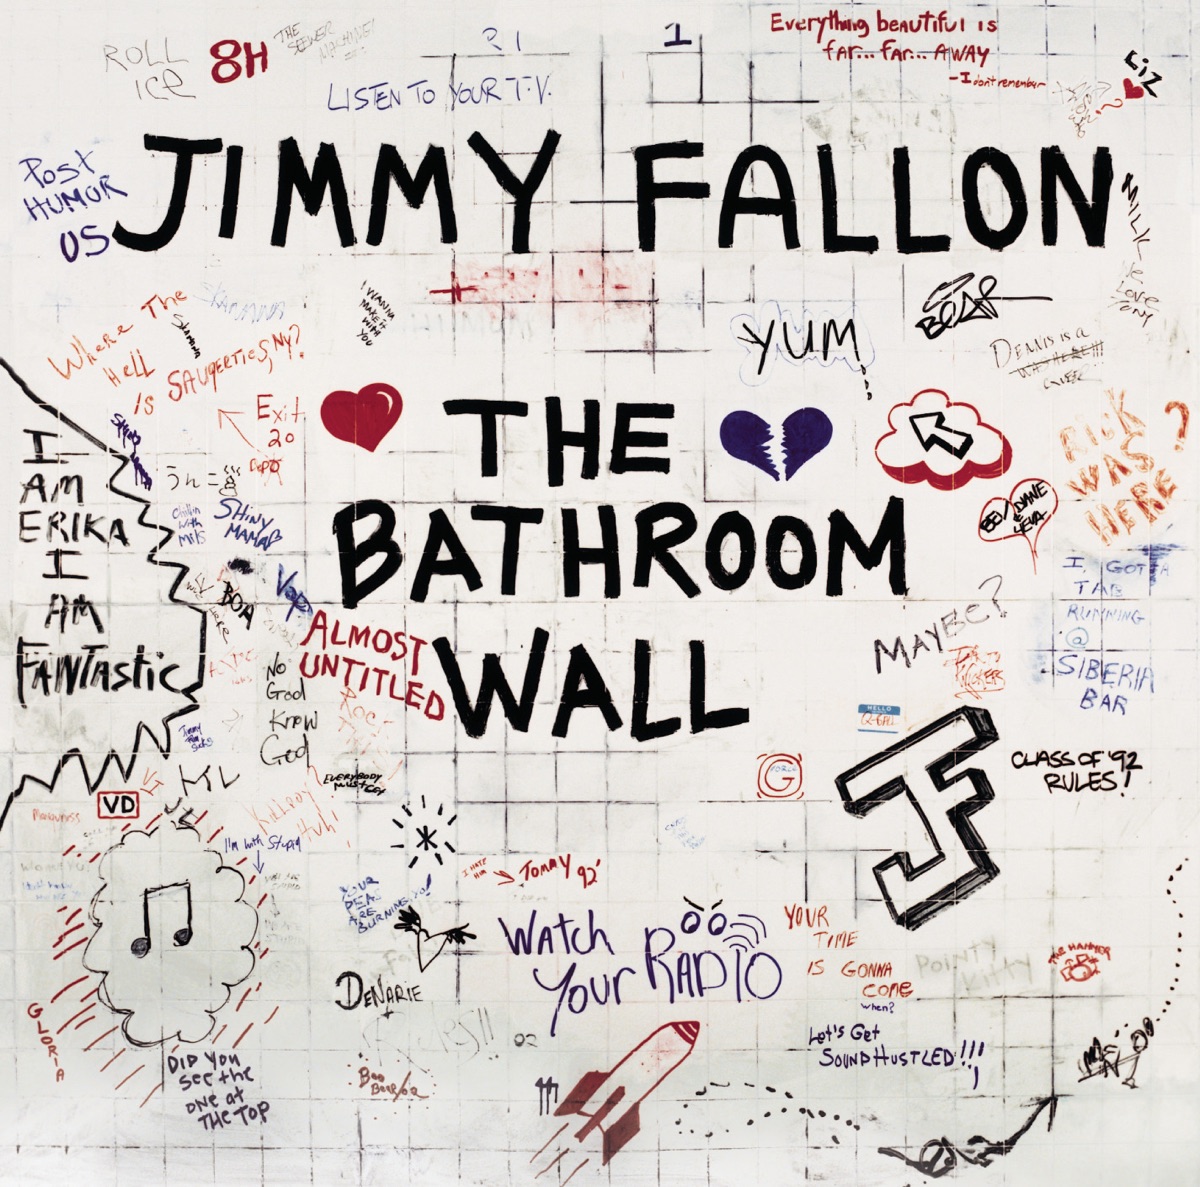 Blow Your Pants Off (Deluxe Version) - Album by Jimmy Fallon - Apple Music